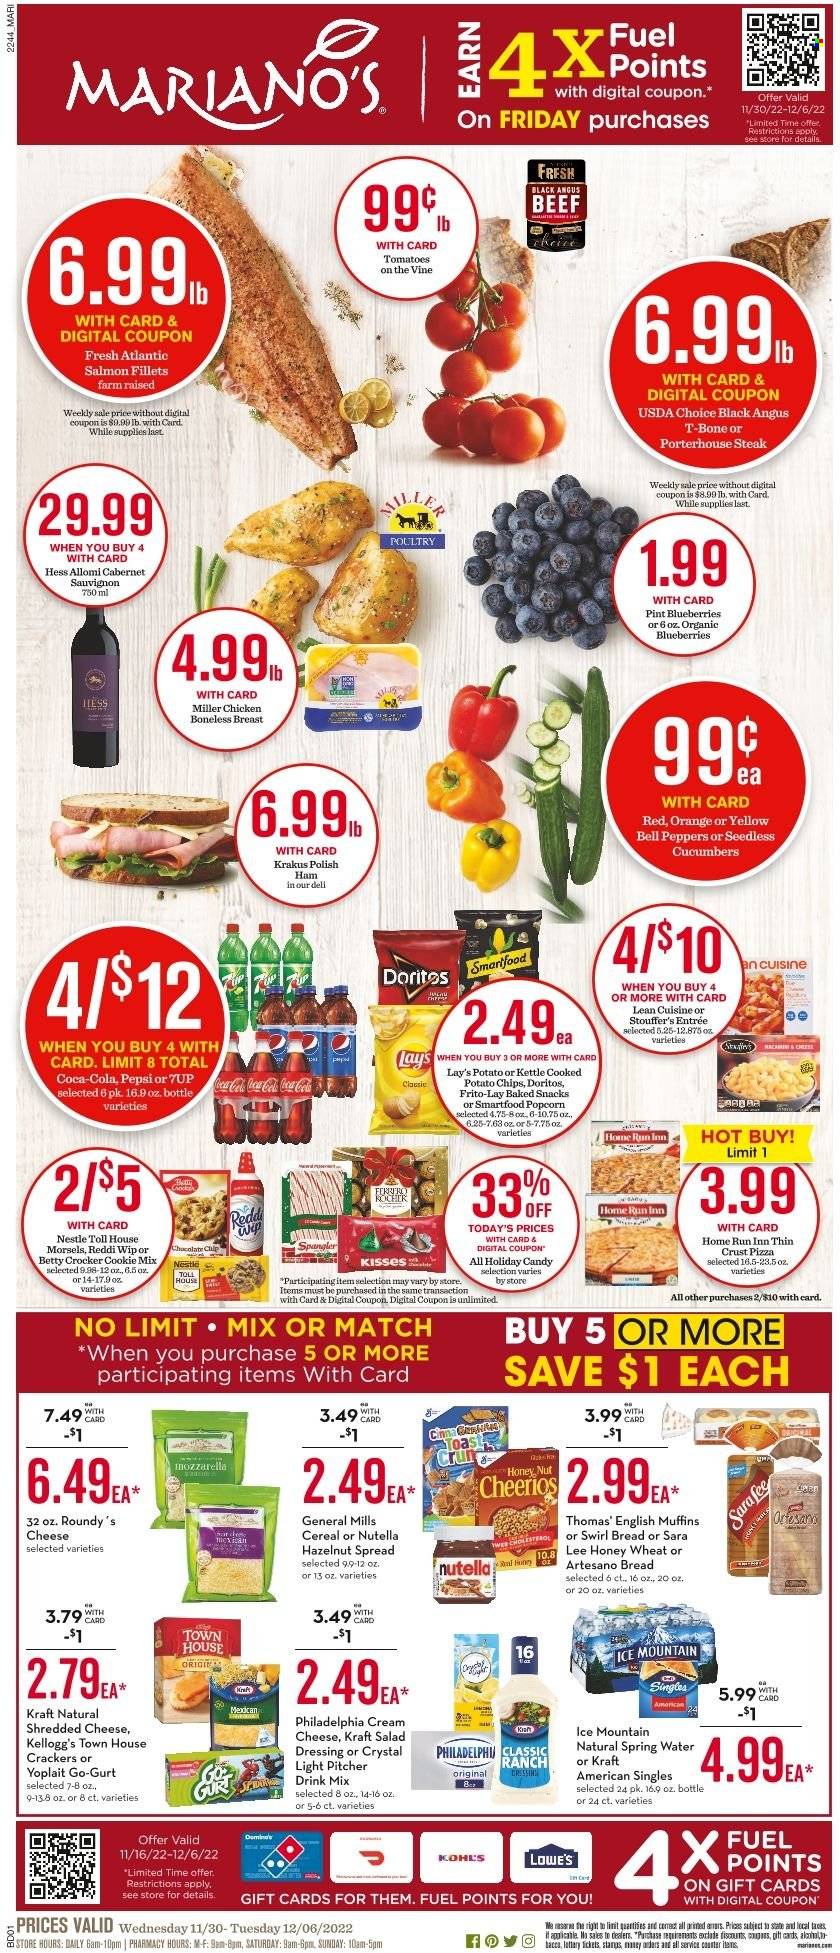 thumbnail - Mariano’s Flyer - 11/30/2022 - 12/06/2022 - Sales products - bread, english muffins, bell peppers, cucumber, peppers, blueberries, oranges, salmon, salmon fillet, macaroni & cheese, pizza, Lean Cuisine, Kraft®, ham, cream cheese, shredded cheese, Philadelphia, Kraft Singles, Yoplait, Stouffer's, Nestlé, Nutella, snack, crackers, Kellogg's, Doritos, potato chips, chips, Lay’s, Smartfood, popcorn, Frito-Lay, cereals, Cheerios, salad dressing, dressing, hazelnut spread, Coca-Cola, Pepsi, 7UP, spring water, Ice Mountain, Cabernet Sauvignon, red wine, wine, alcohol, Miller, beef meat, t-bone steak, steak, pitcher. Page 1.